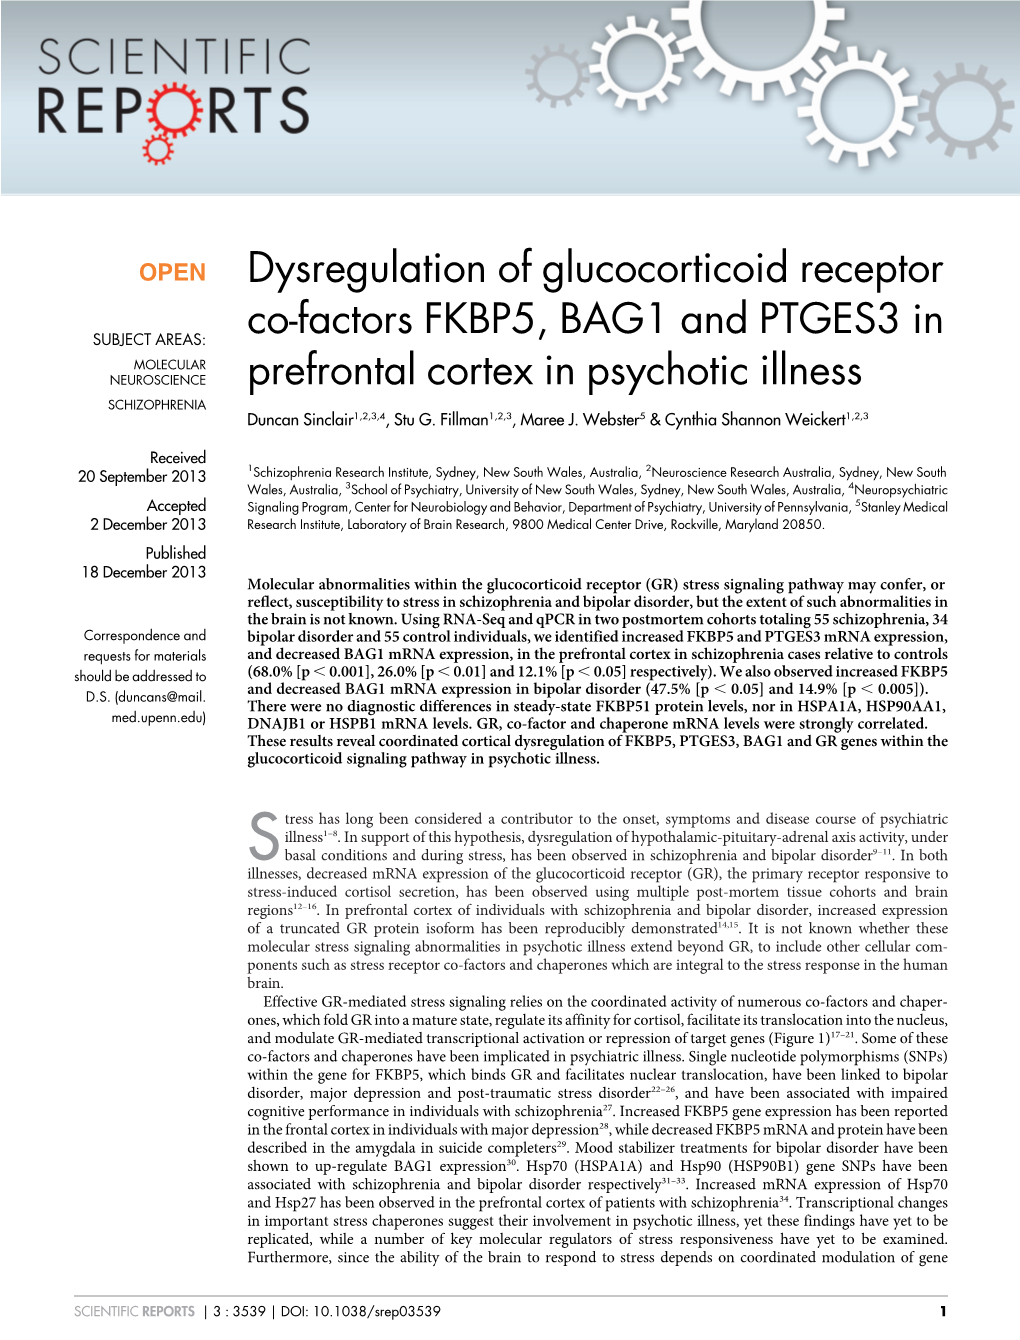 Dysregulation of Glucocorticoid Receptor Co-Factors FKBP5, BAG1 and PTGES3 in Prefrontal Cortex in Psychotic Illness